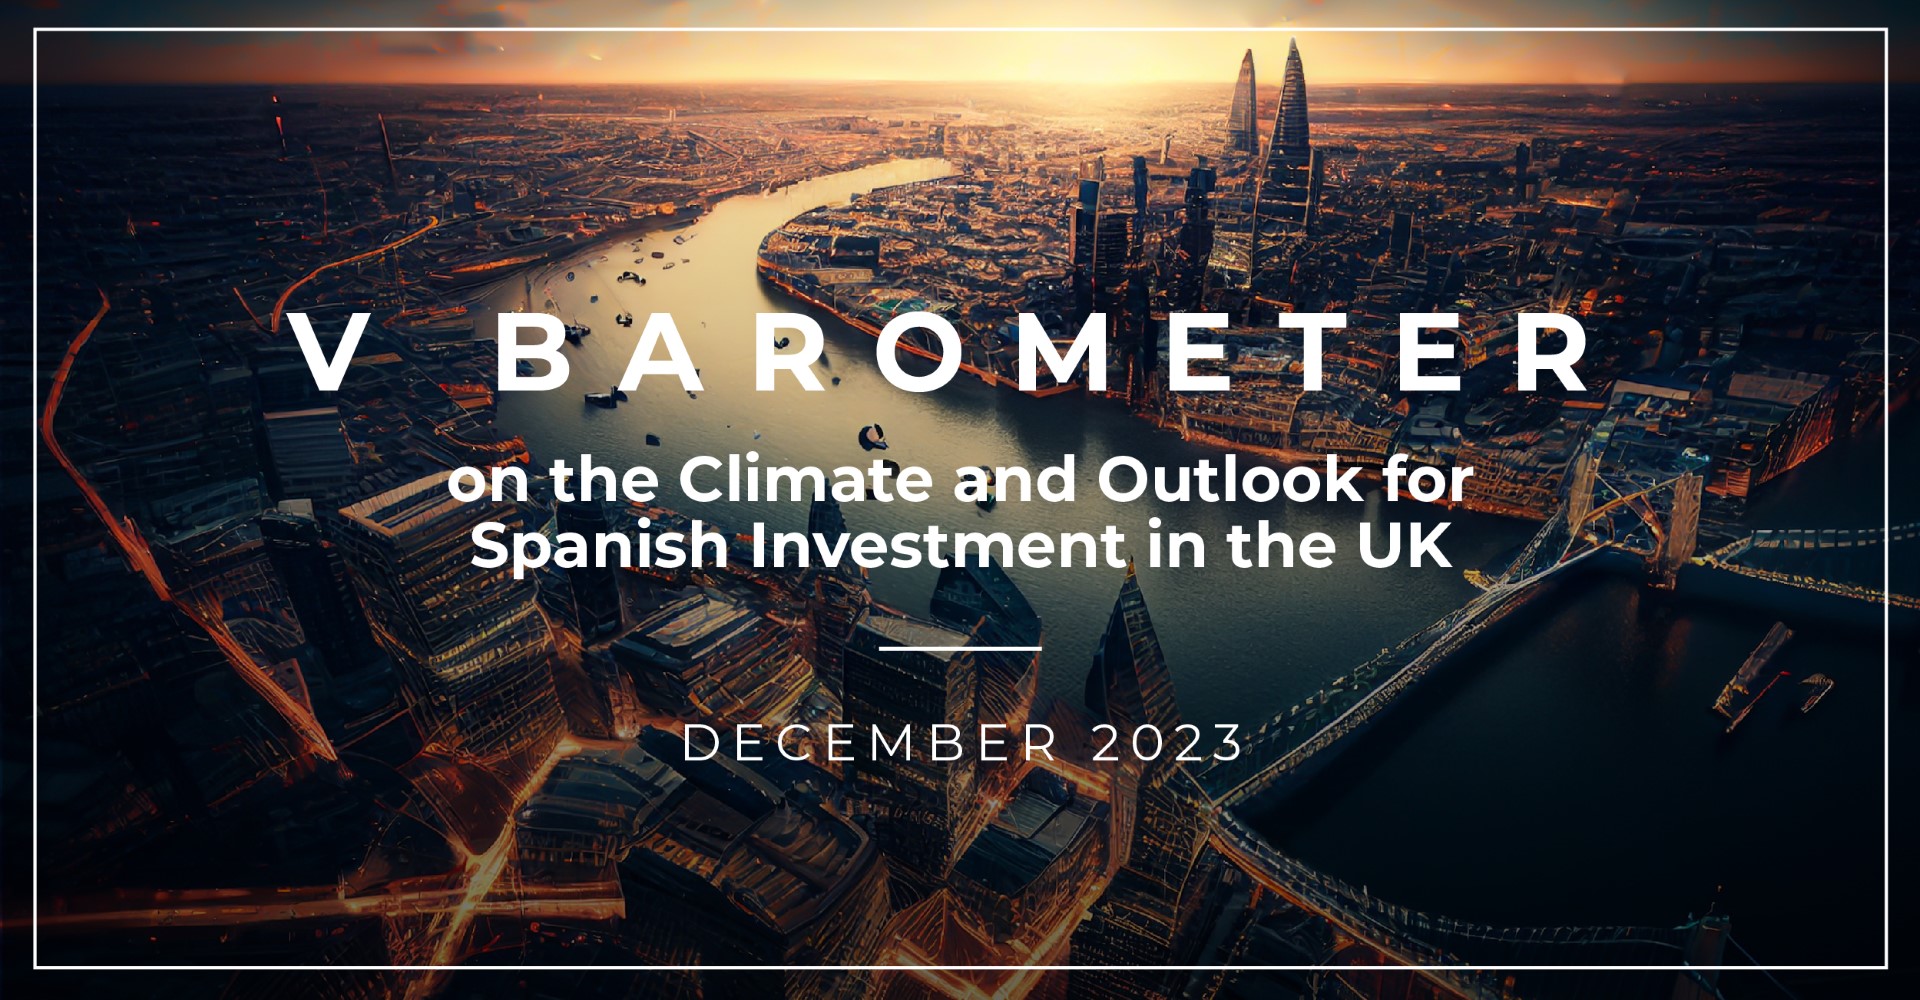 V BAROMETER ON THE CLIMATE AND OUTLOOK FOR SPANISH INVESTMENT IN THE UK